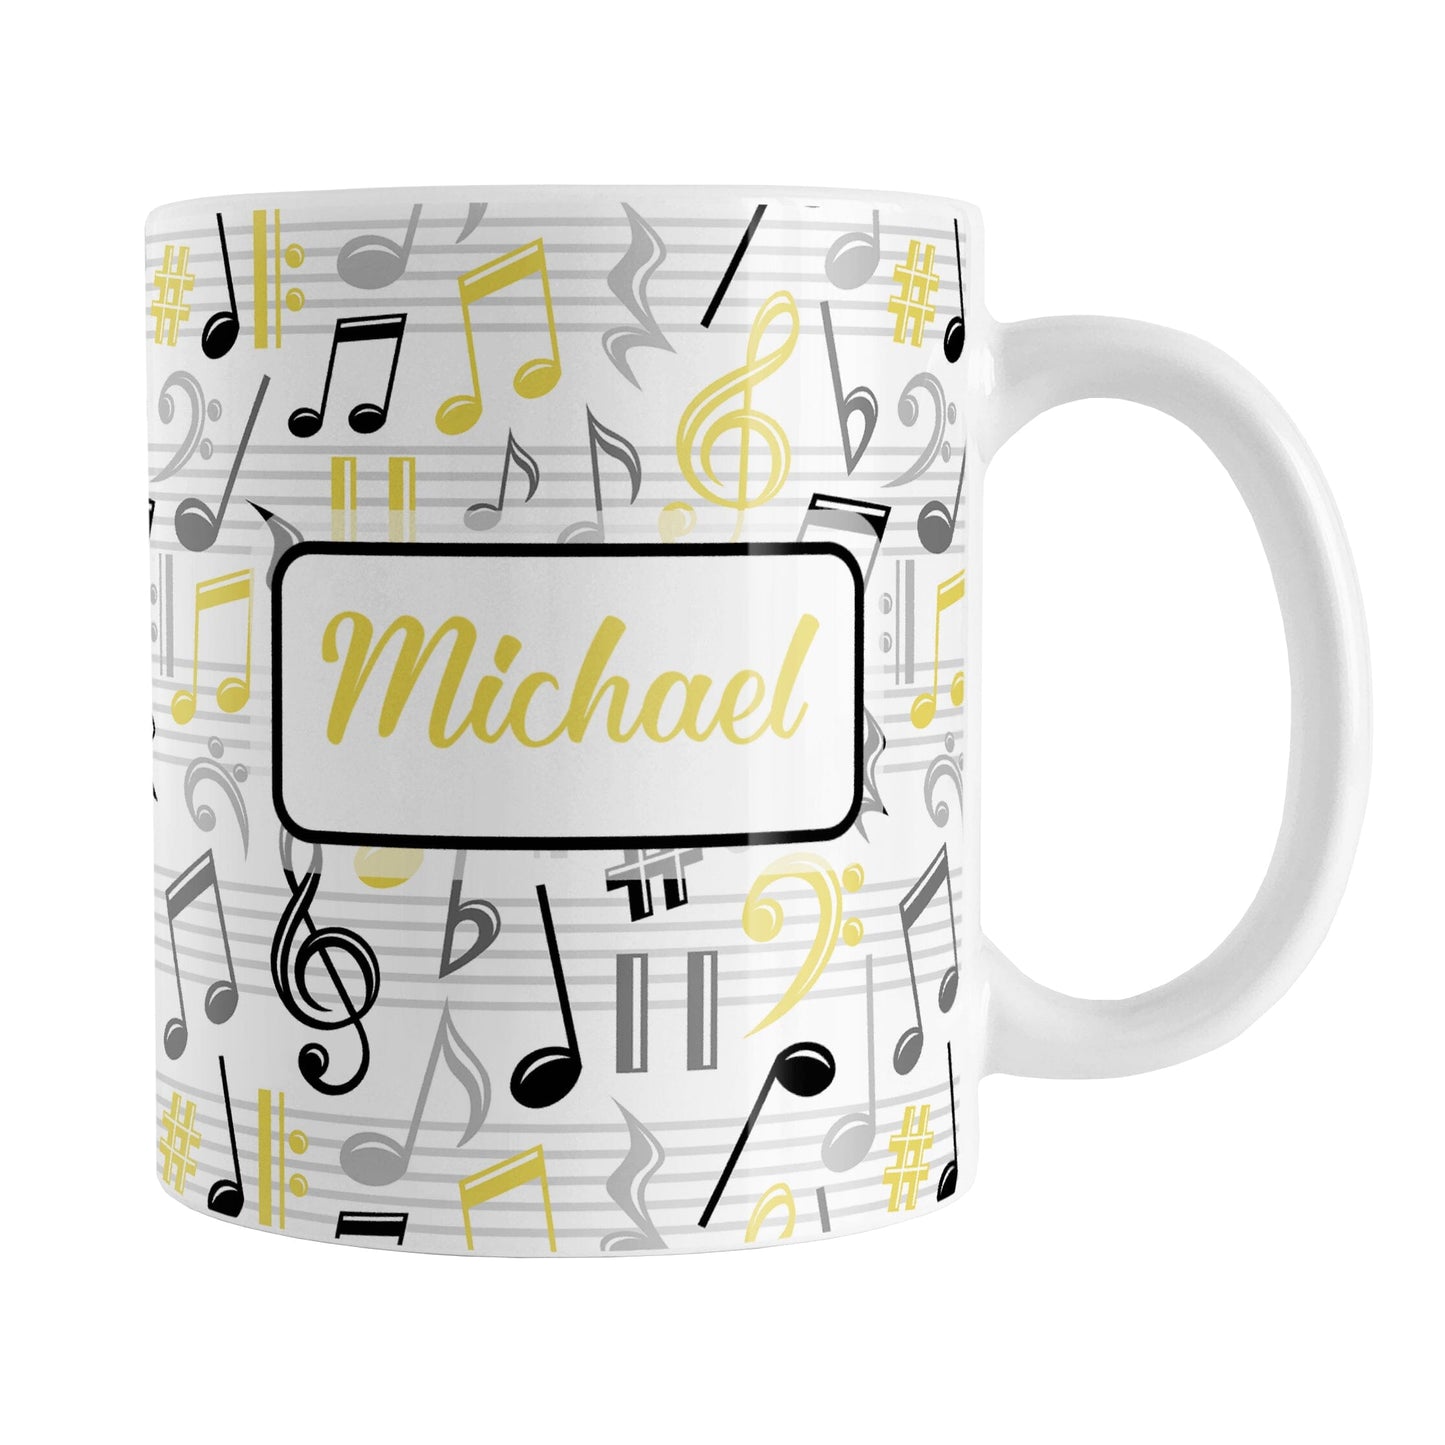 Personalized Yellow Music Notes Pattern Mug (11oz) at Amy's Coffee Mugs. A ceramic coffee mug designed with music notes and symbols in yellow, black, and gray in a pattern that wraps around the mug to the handle. Your personalized name is custom printed in a yellow script font on white over the music pattern design on both sides of the mug.